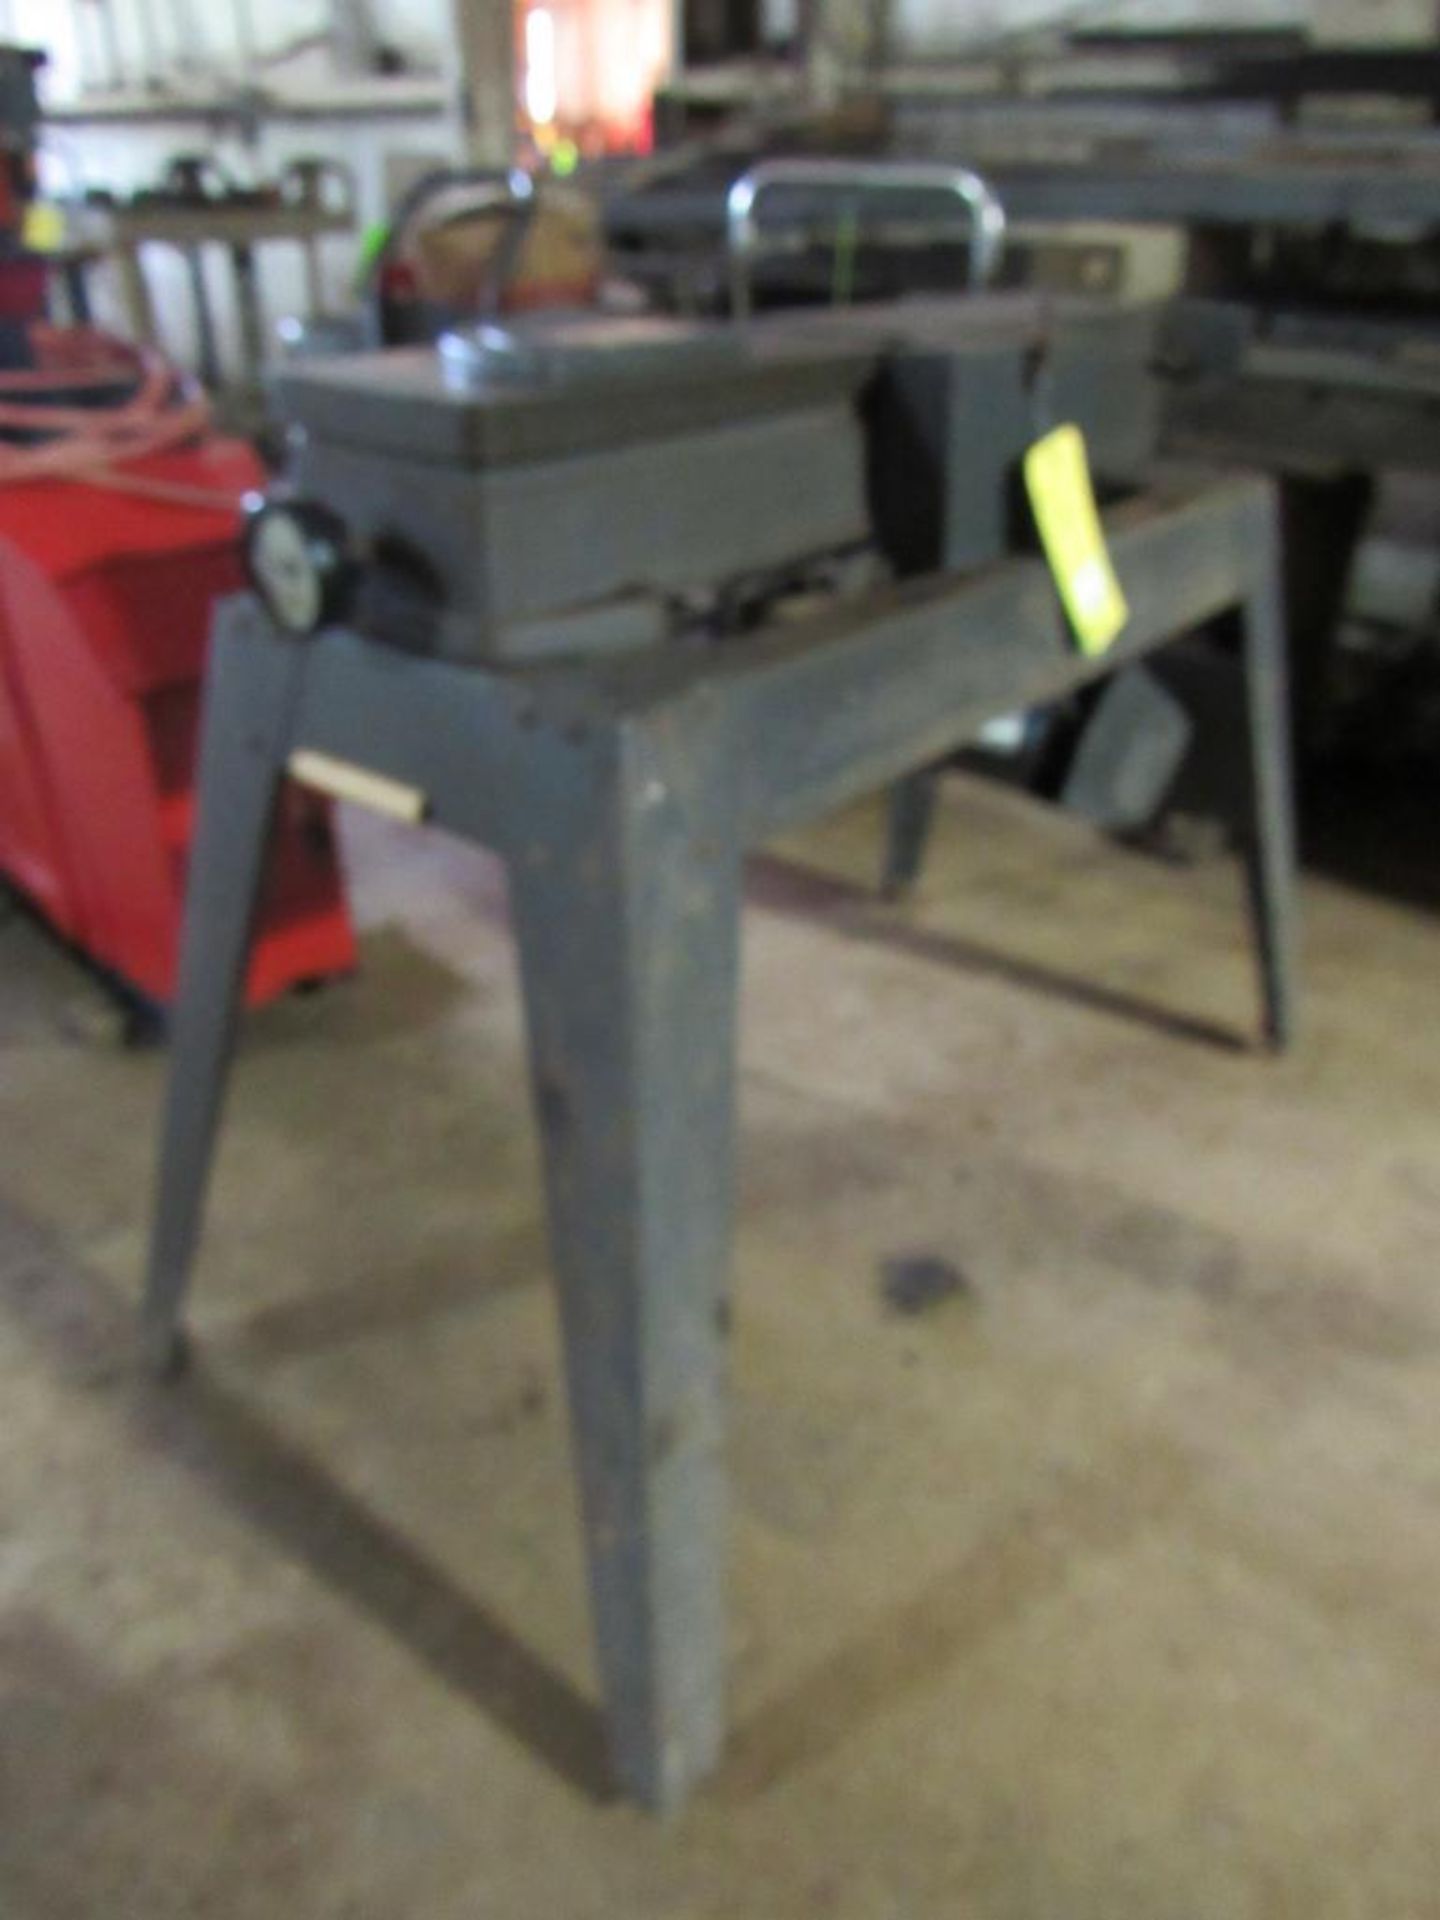 Sears Craftsman Model 113.206932 6-1/8" Jointer-Planer on A-Frame Stand - Image 2 of 7